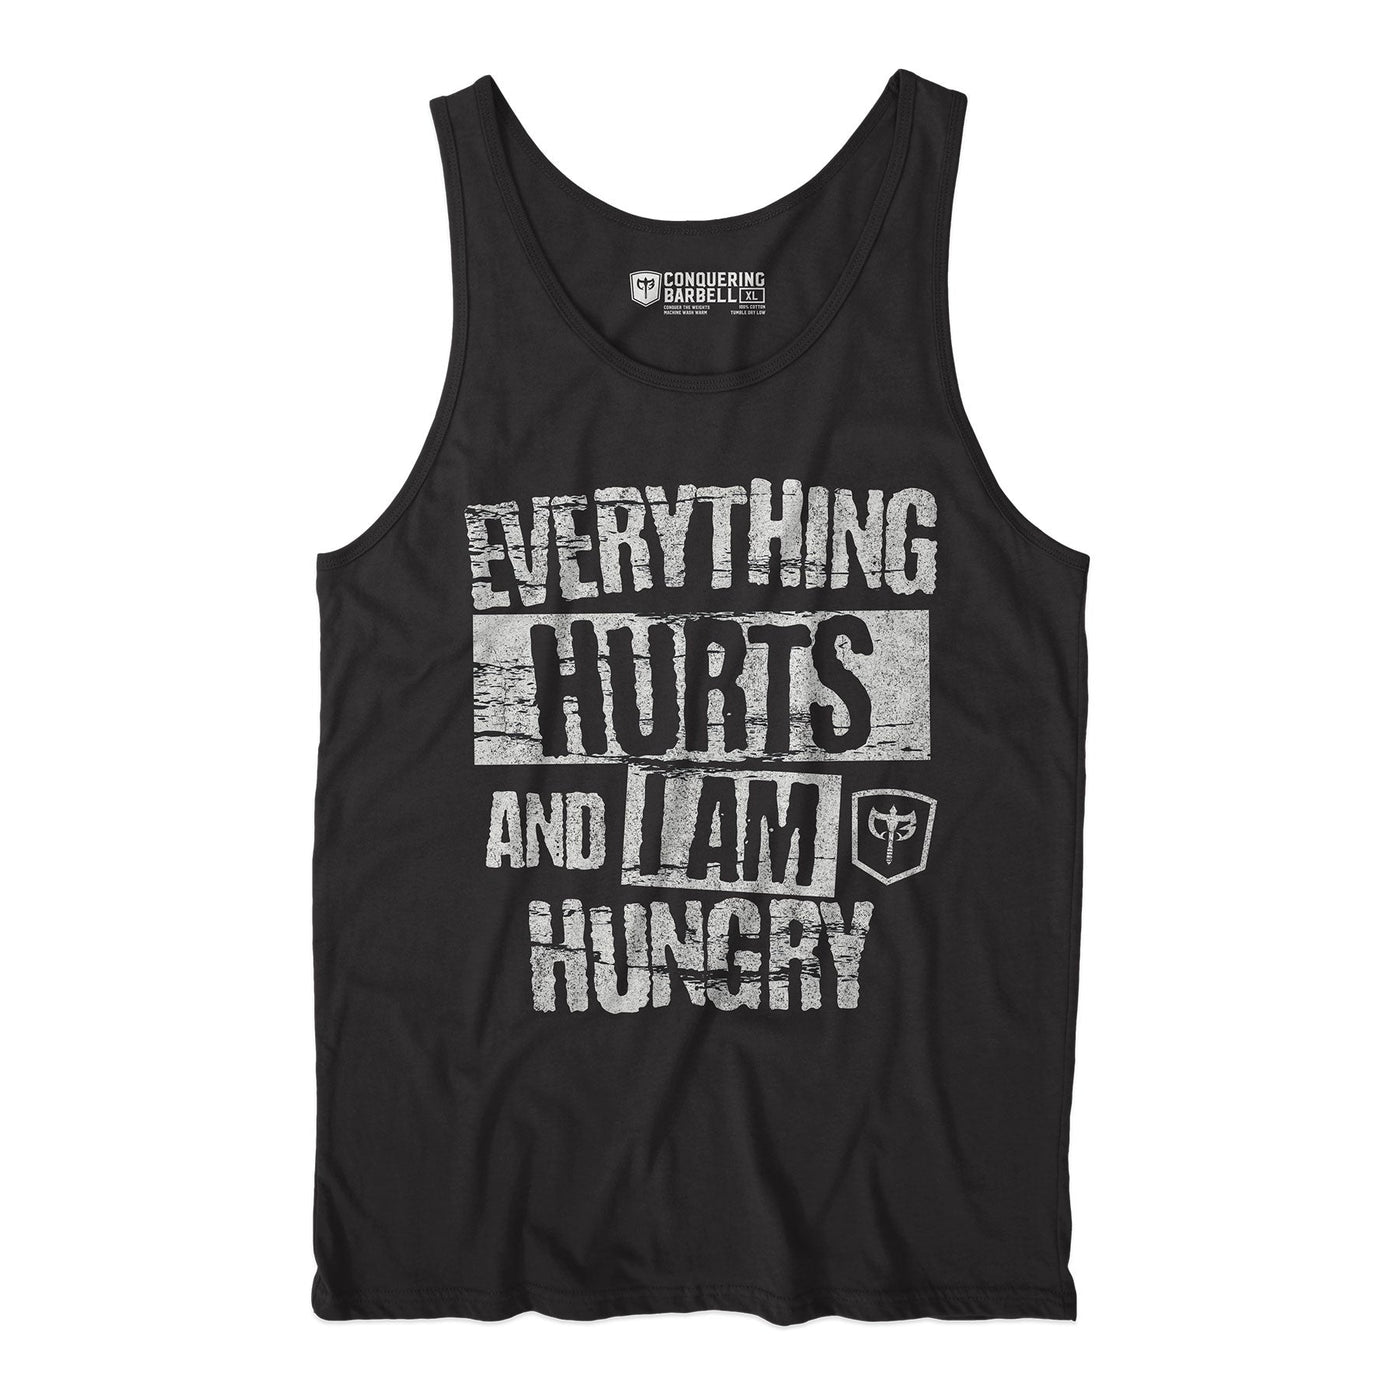 Everything Hurts and I am hungry - on Black tank top - Conquering Barbell